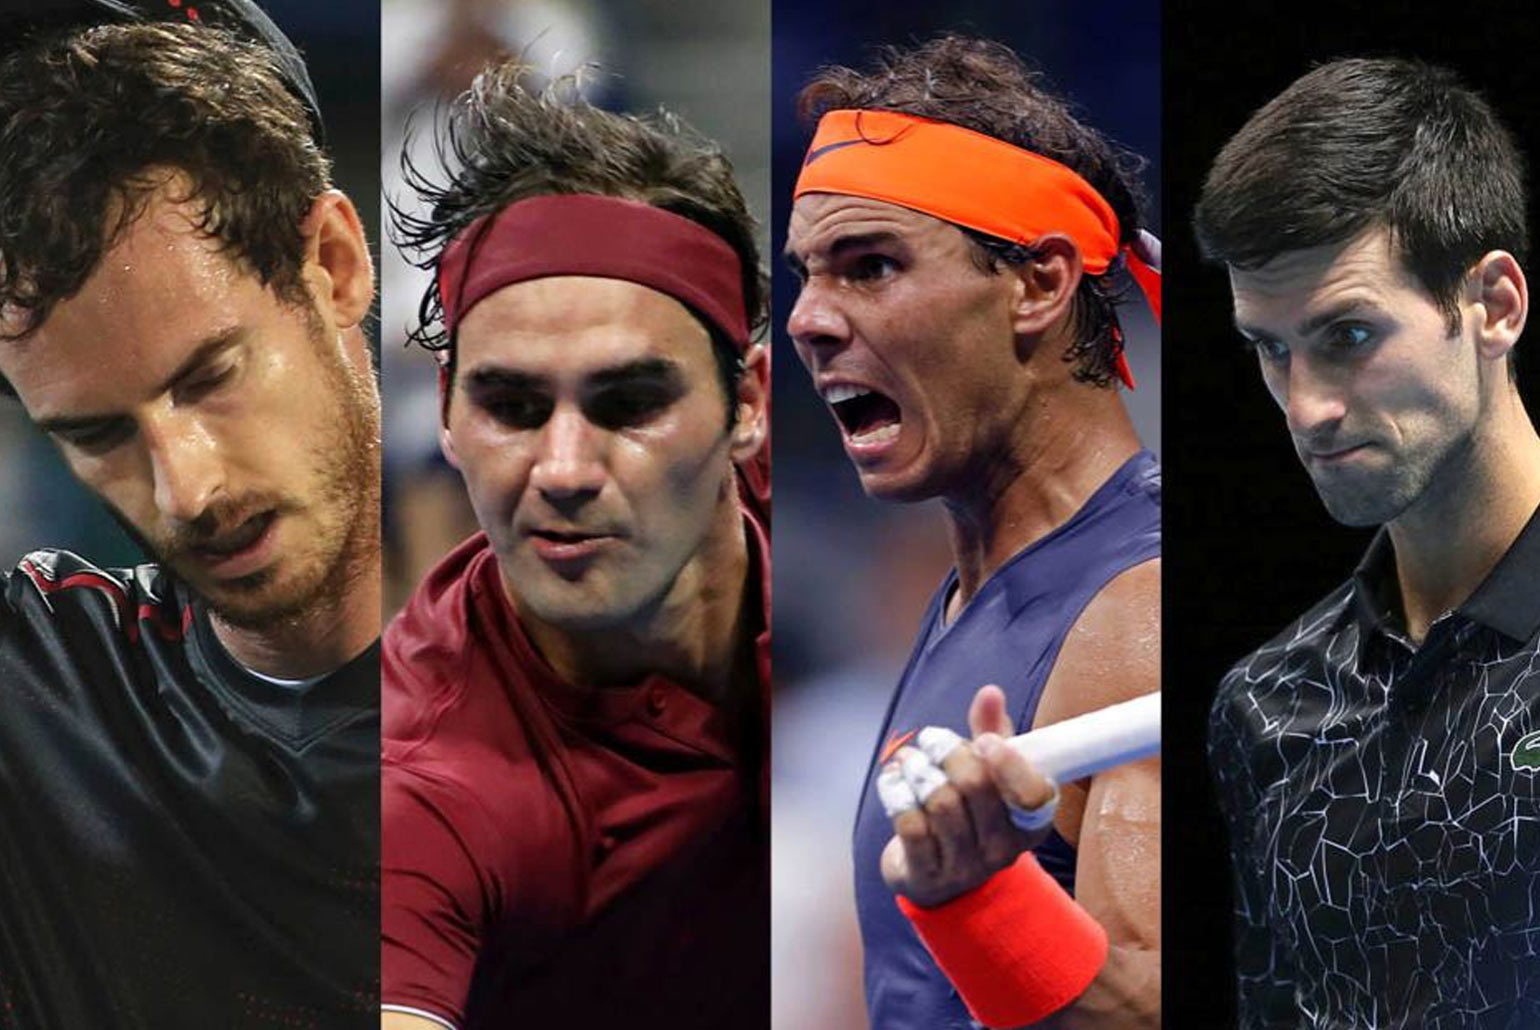 Andy Murray is Ready for Retirement: Rafael Nadal and Roger Federer May be Next in Line